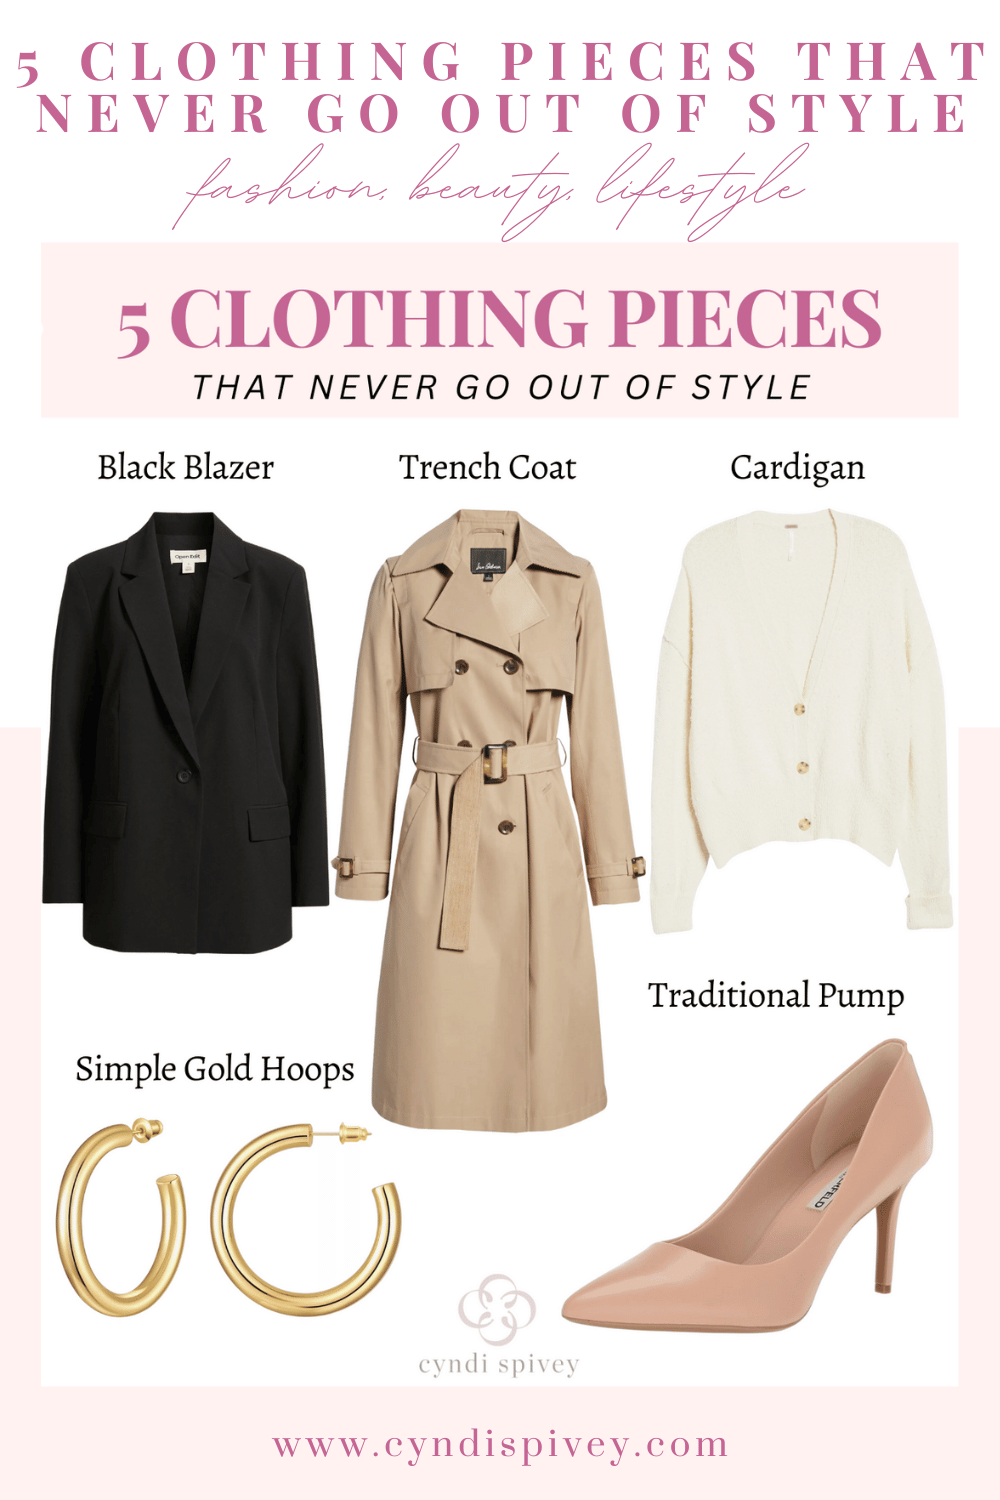 fashion blog, fashion blogger, fashion favorites, 5 clothing pieces that never go out of style, timeless pieces, fashion finds, classic staple pieces, closet must haves, closet essentials, wardrobe staples, wardrobe basics, neutral fashion pieces, fall closet basics, fashion essentials